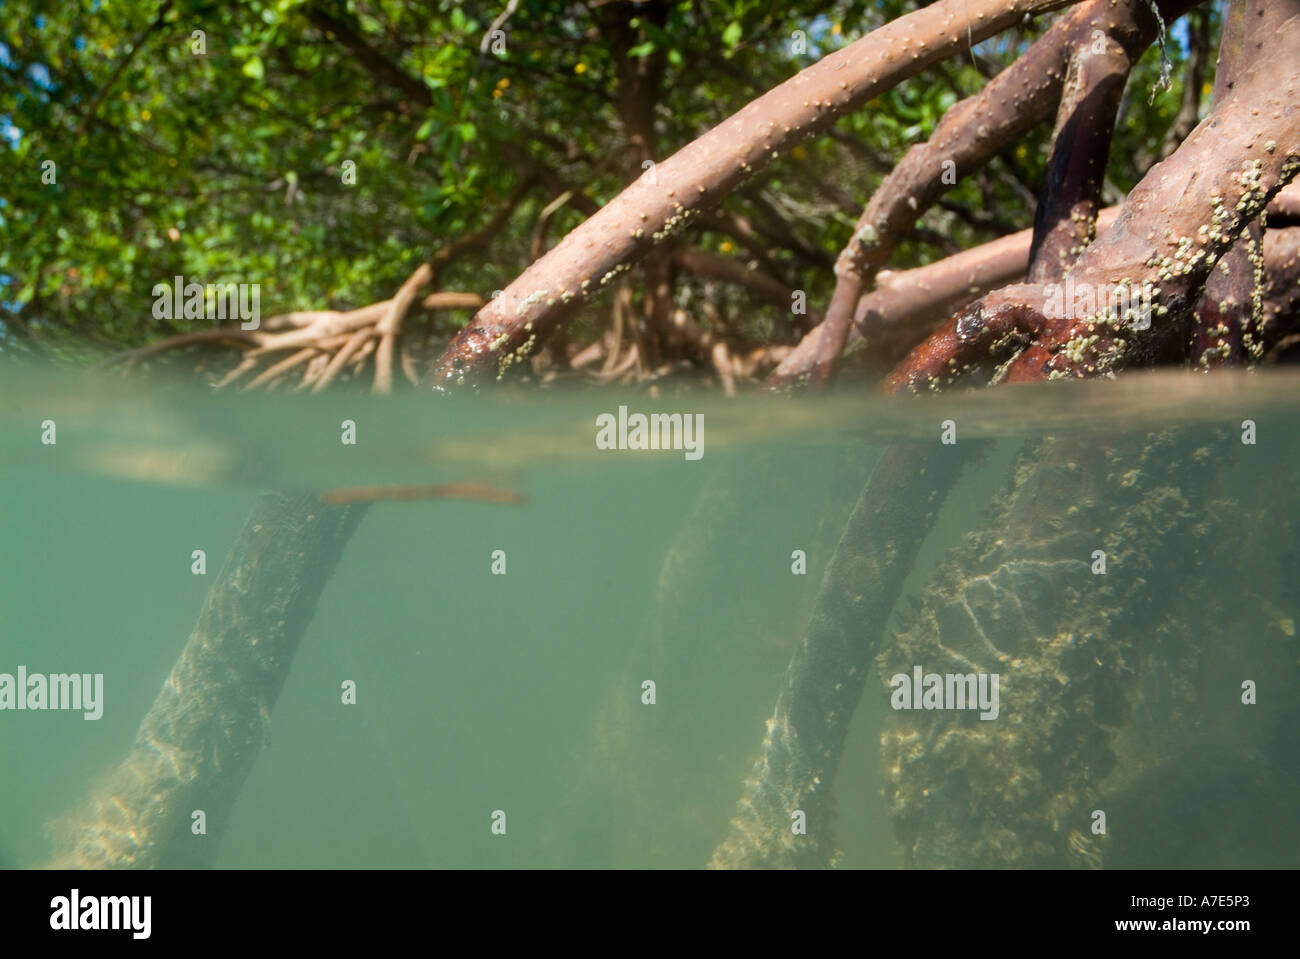 Mangroves and their roots underwater at Cayo Jutias, Cuba Stock Photo